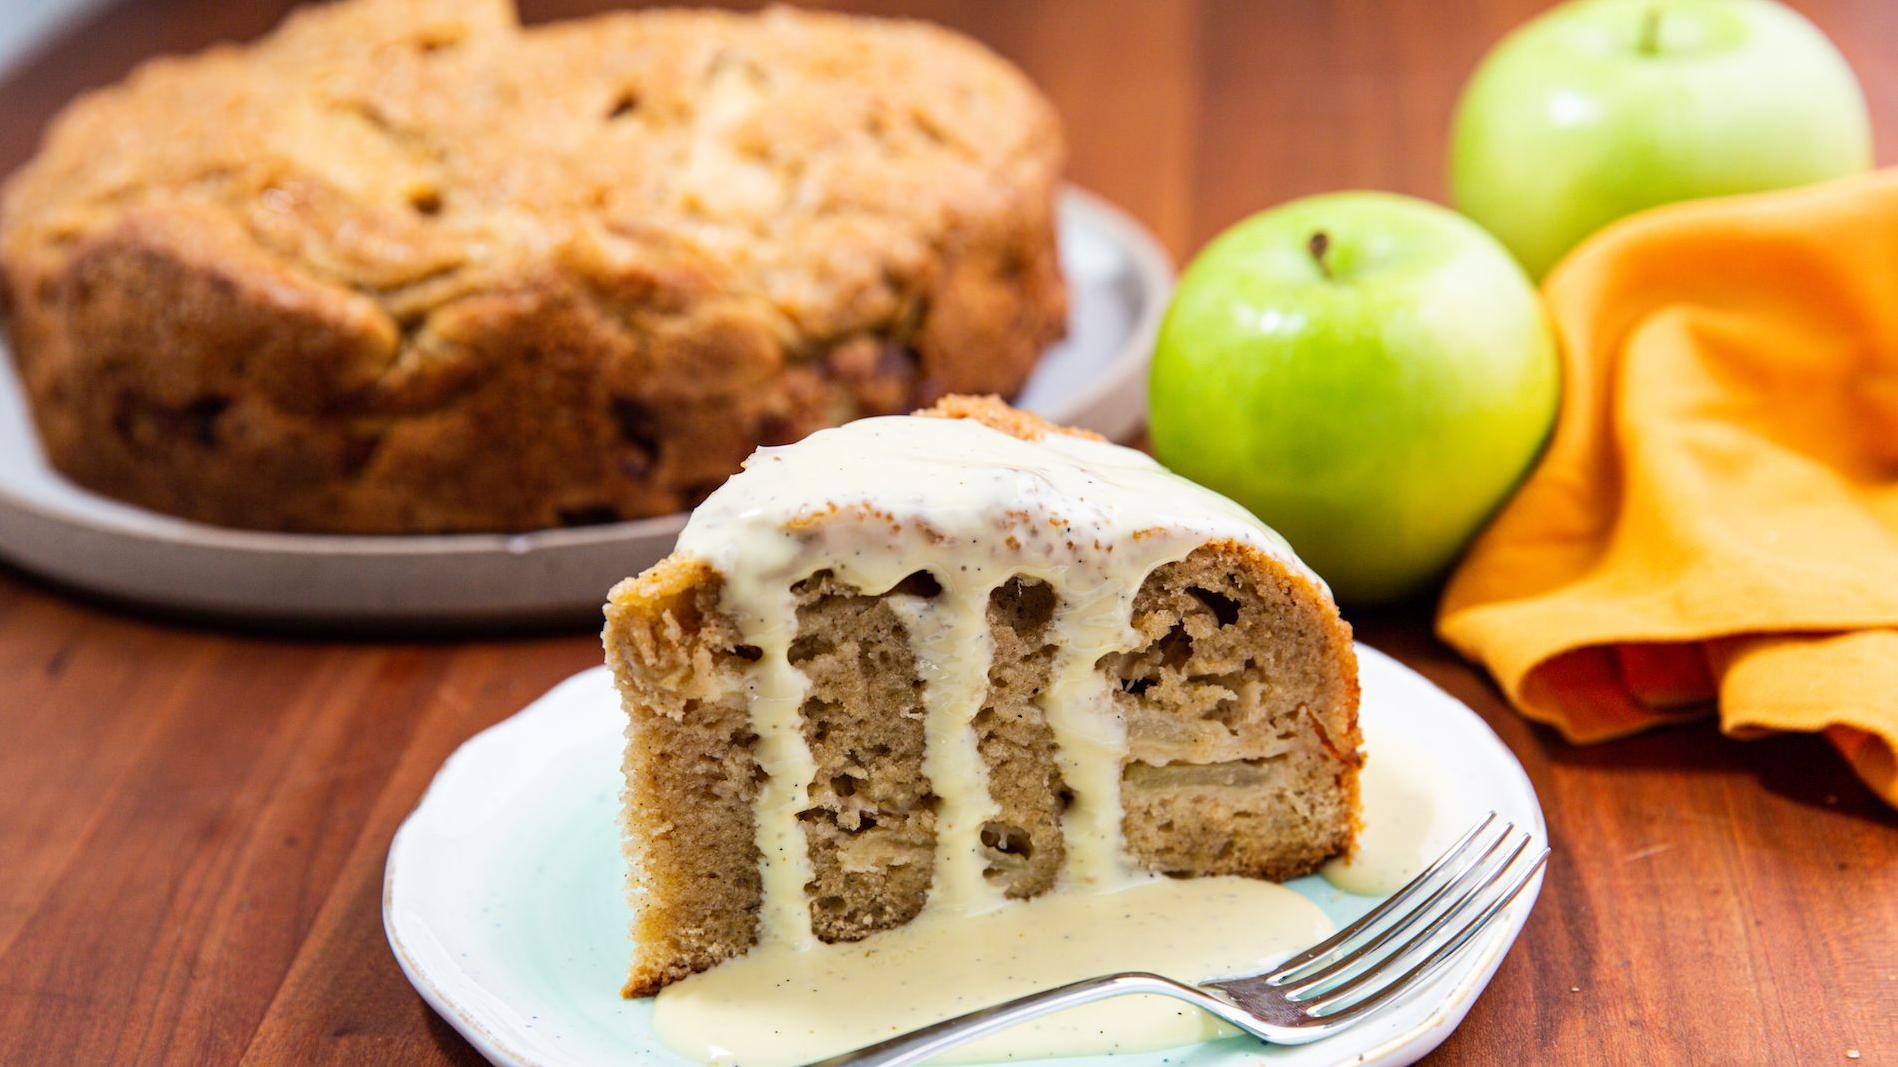  The apples add a sweet-tart crunch to the cake's pillowy layers, making it the perfect balance.